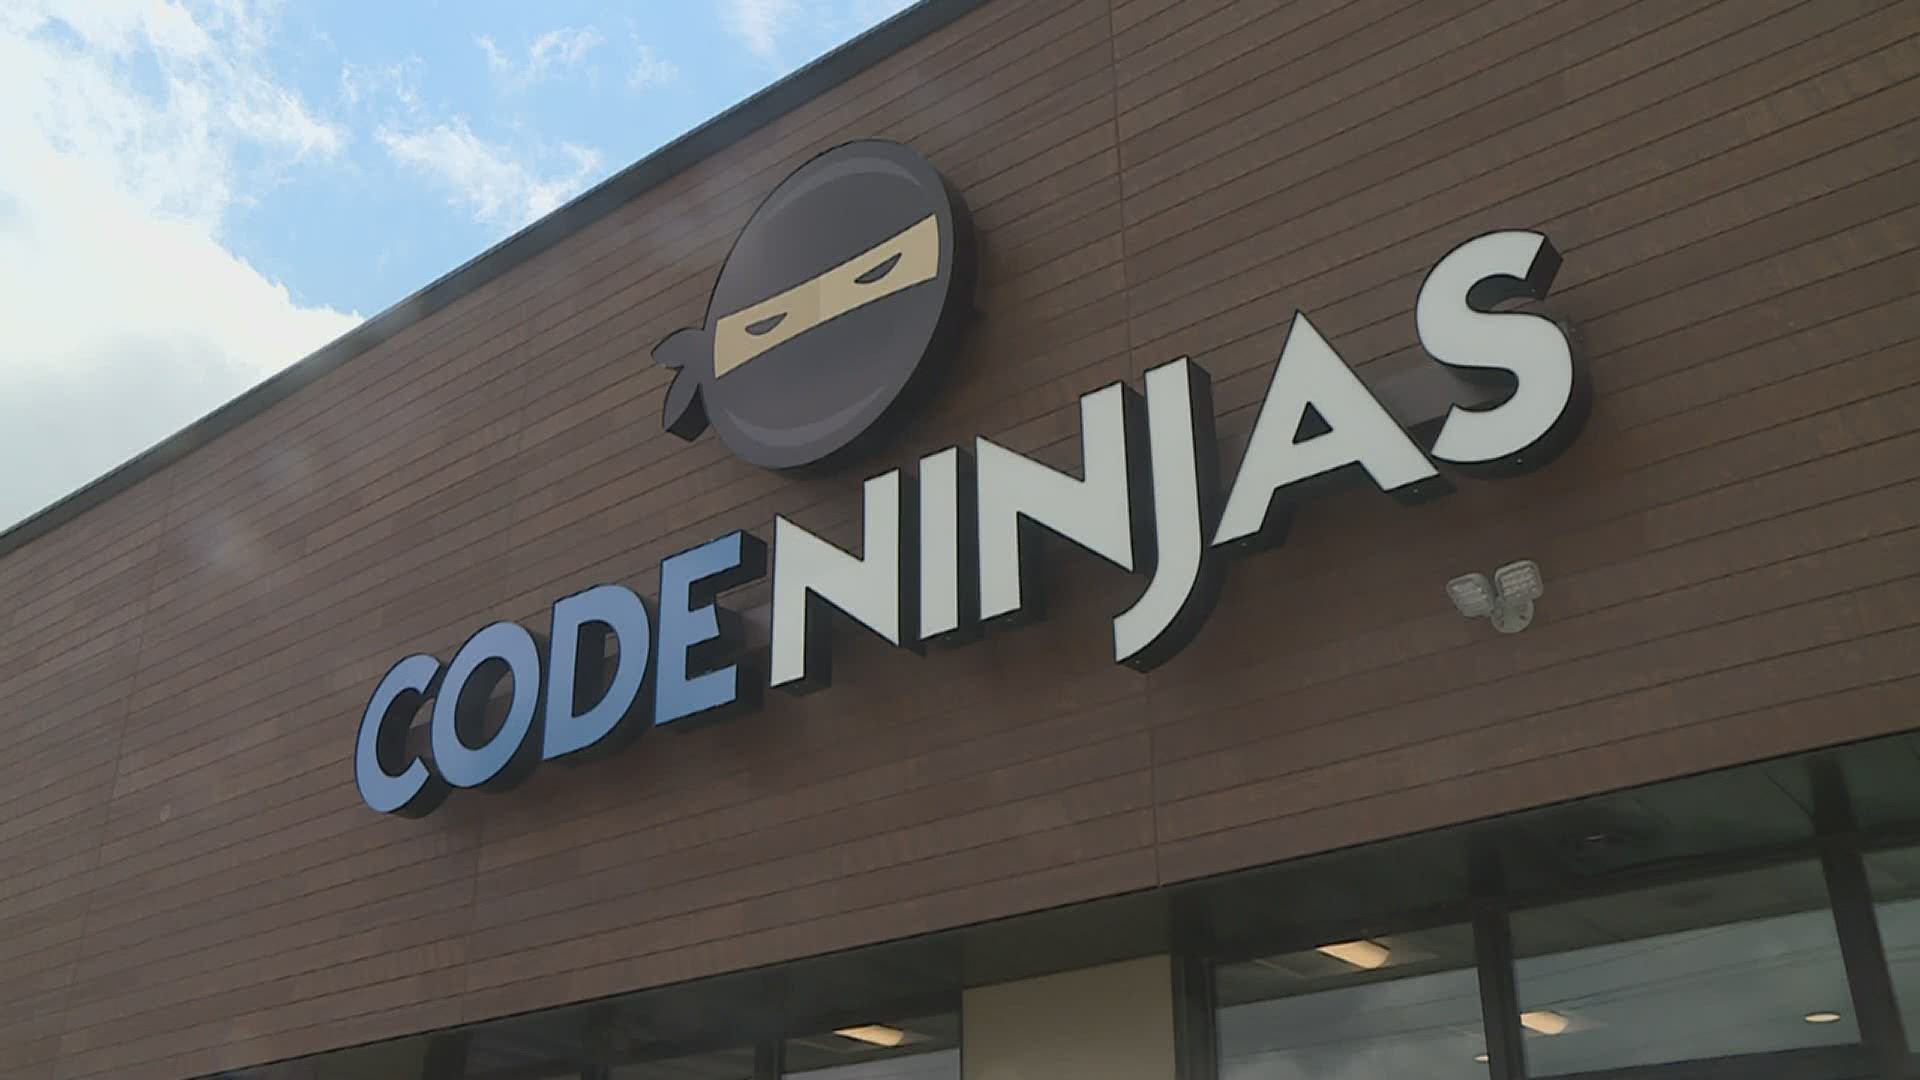 A new Davenport business is teaching kids the fundamentals of coding and computing through the lens of video games.